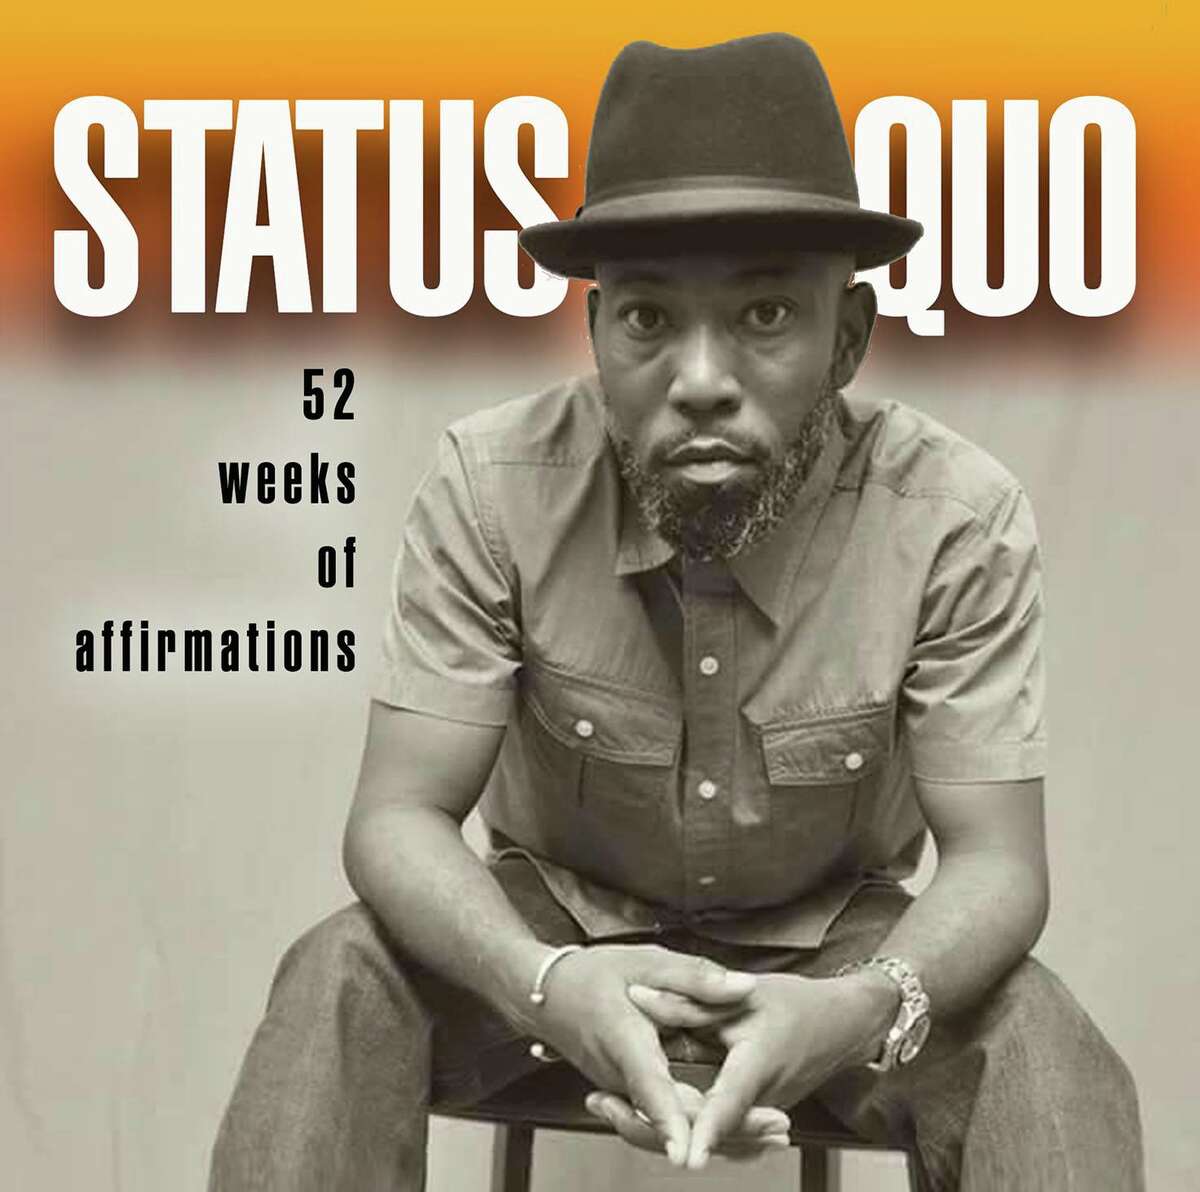 Status Quo: 52 weeks of affirmations by Zin was just released.